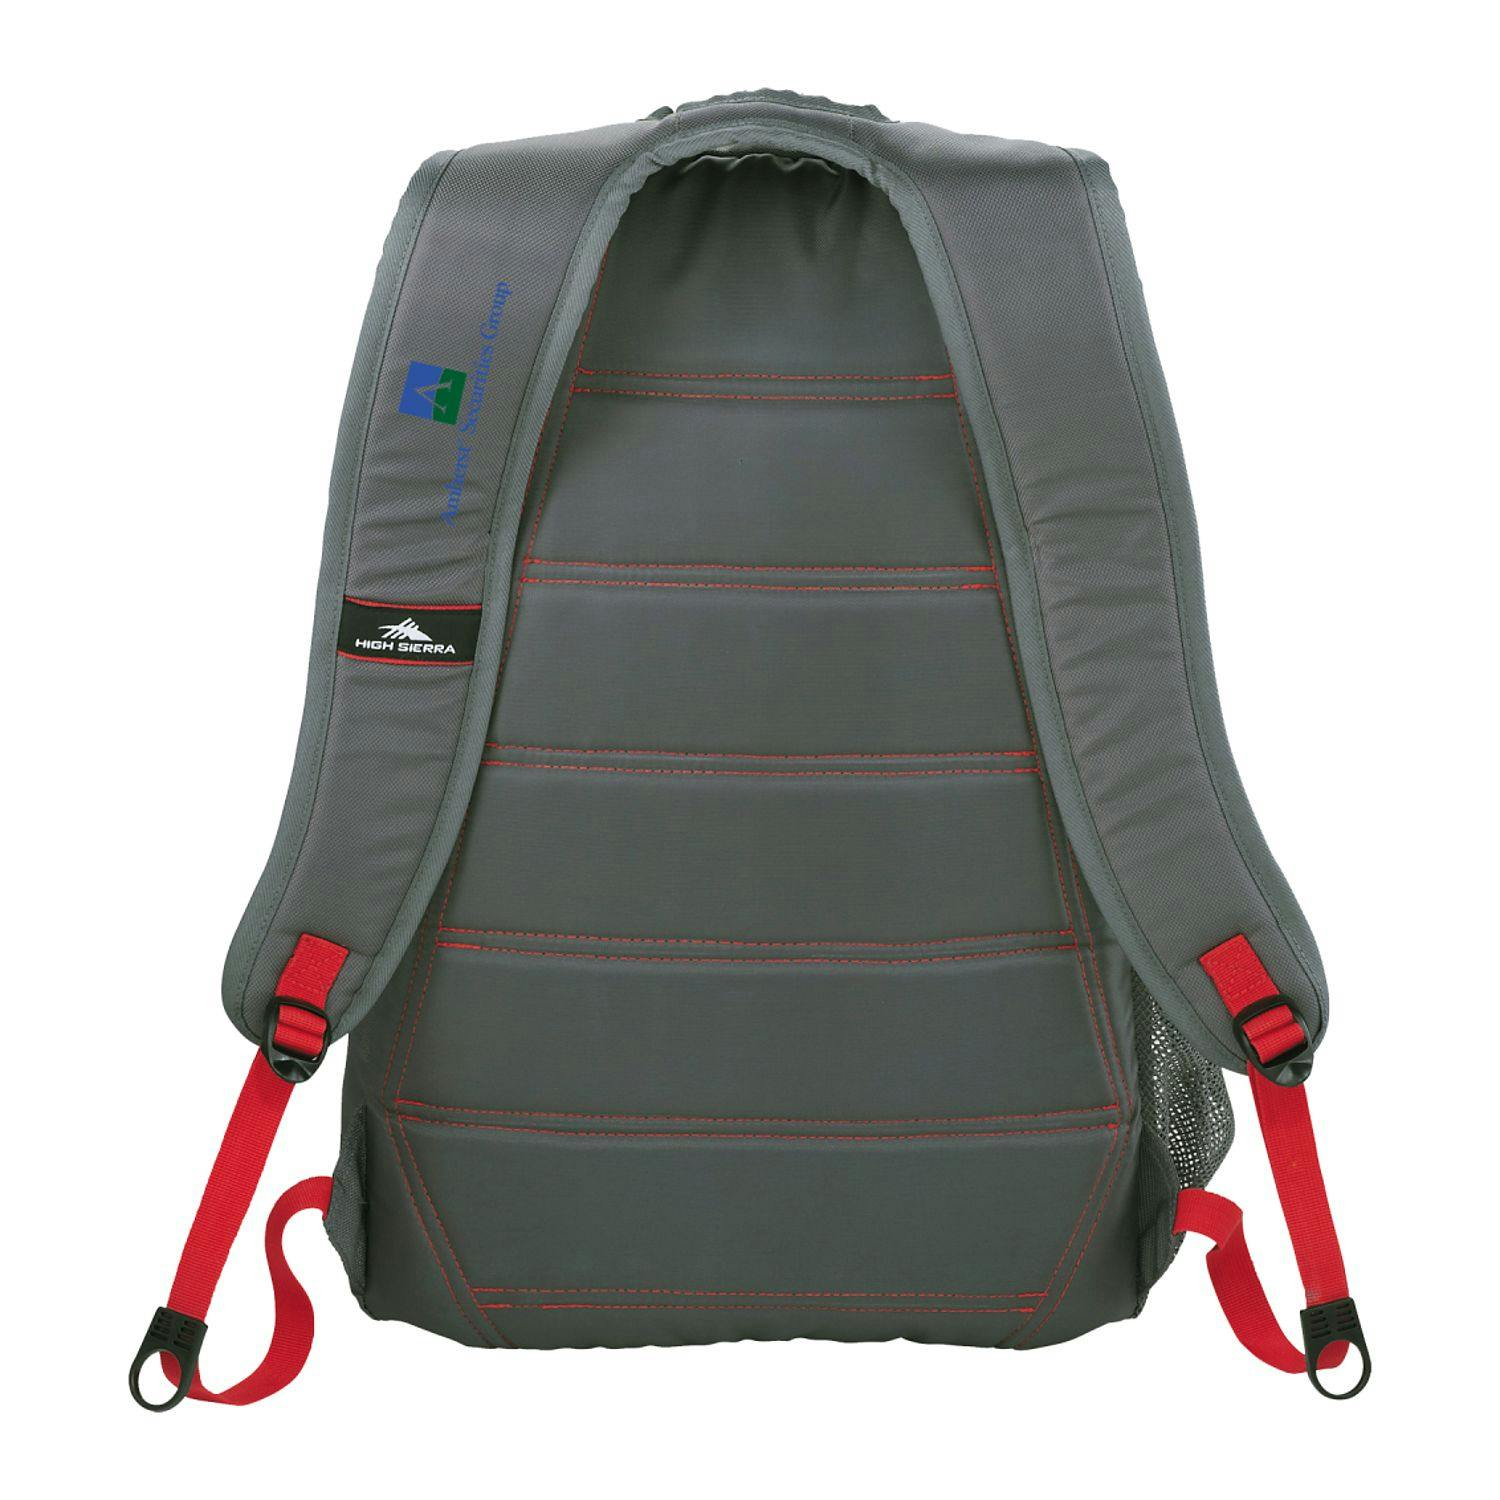 High Sierra Fallout 17" Computer Backpack - additional Image 2